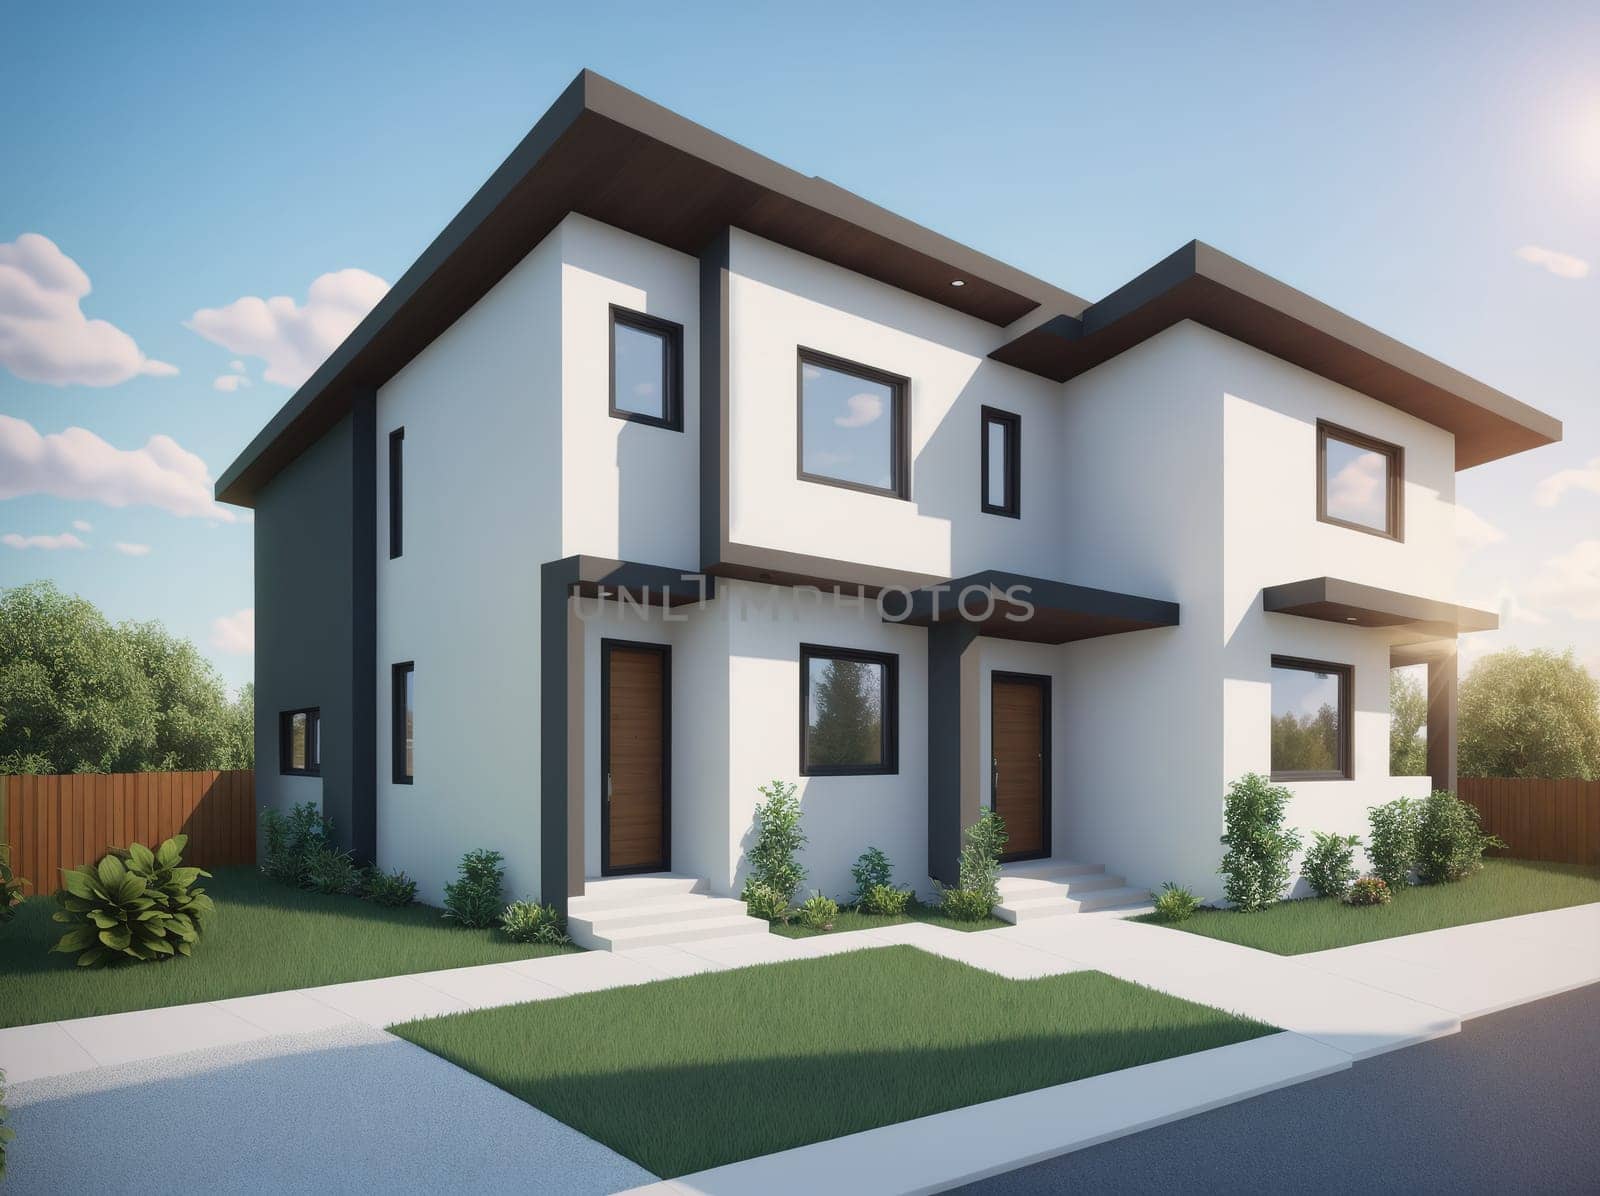 A rendering of a two-story house with a modern design. by creart